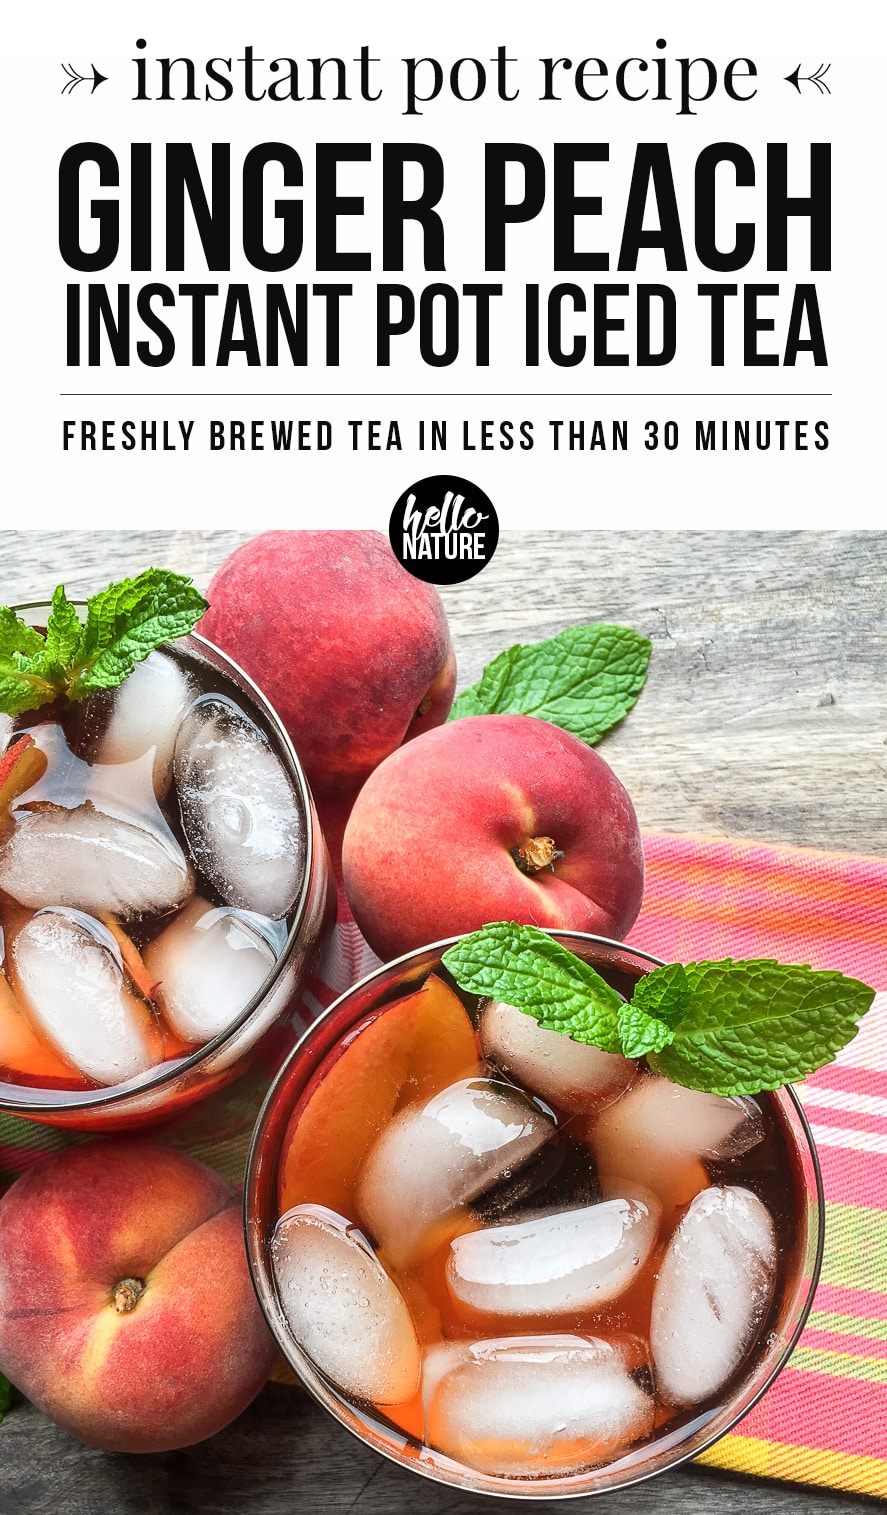 Wisconsin lifestyle blogger Ashley from Hello Nature shares a refreshing recipe for Ginger Peach Iced Tea that's made in the Instant Pot. See how easy Instant Pot iced tea is now!